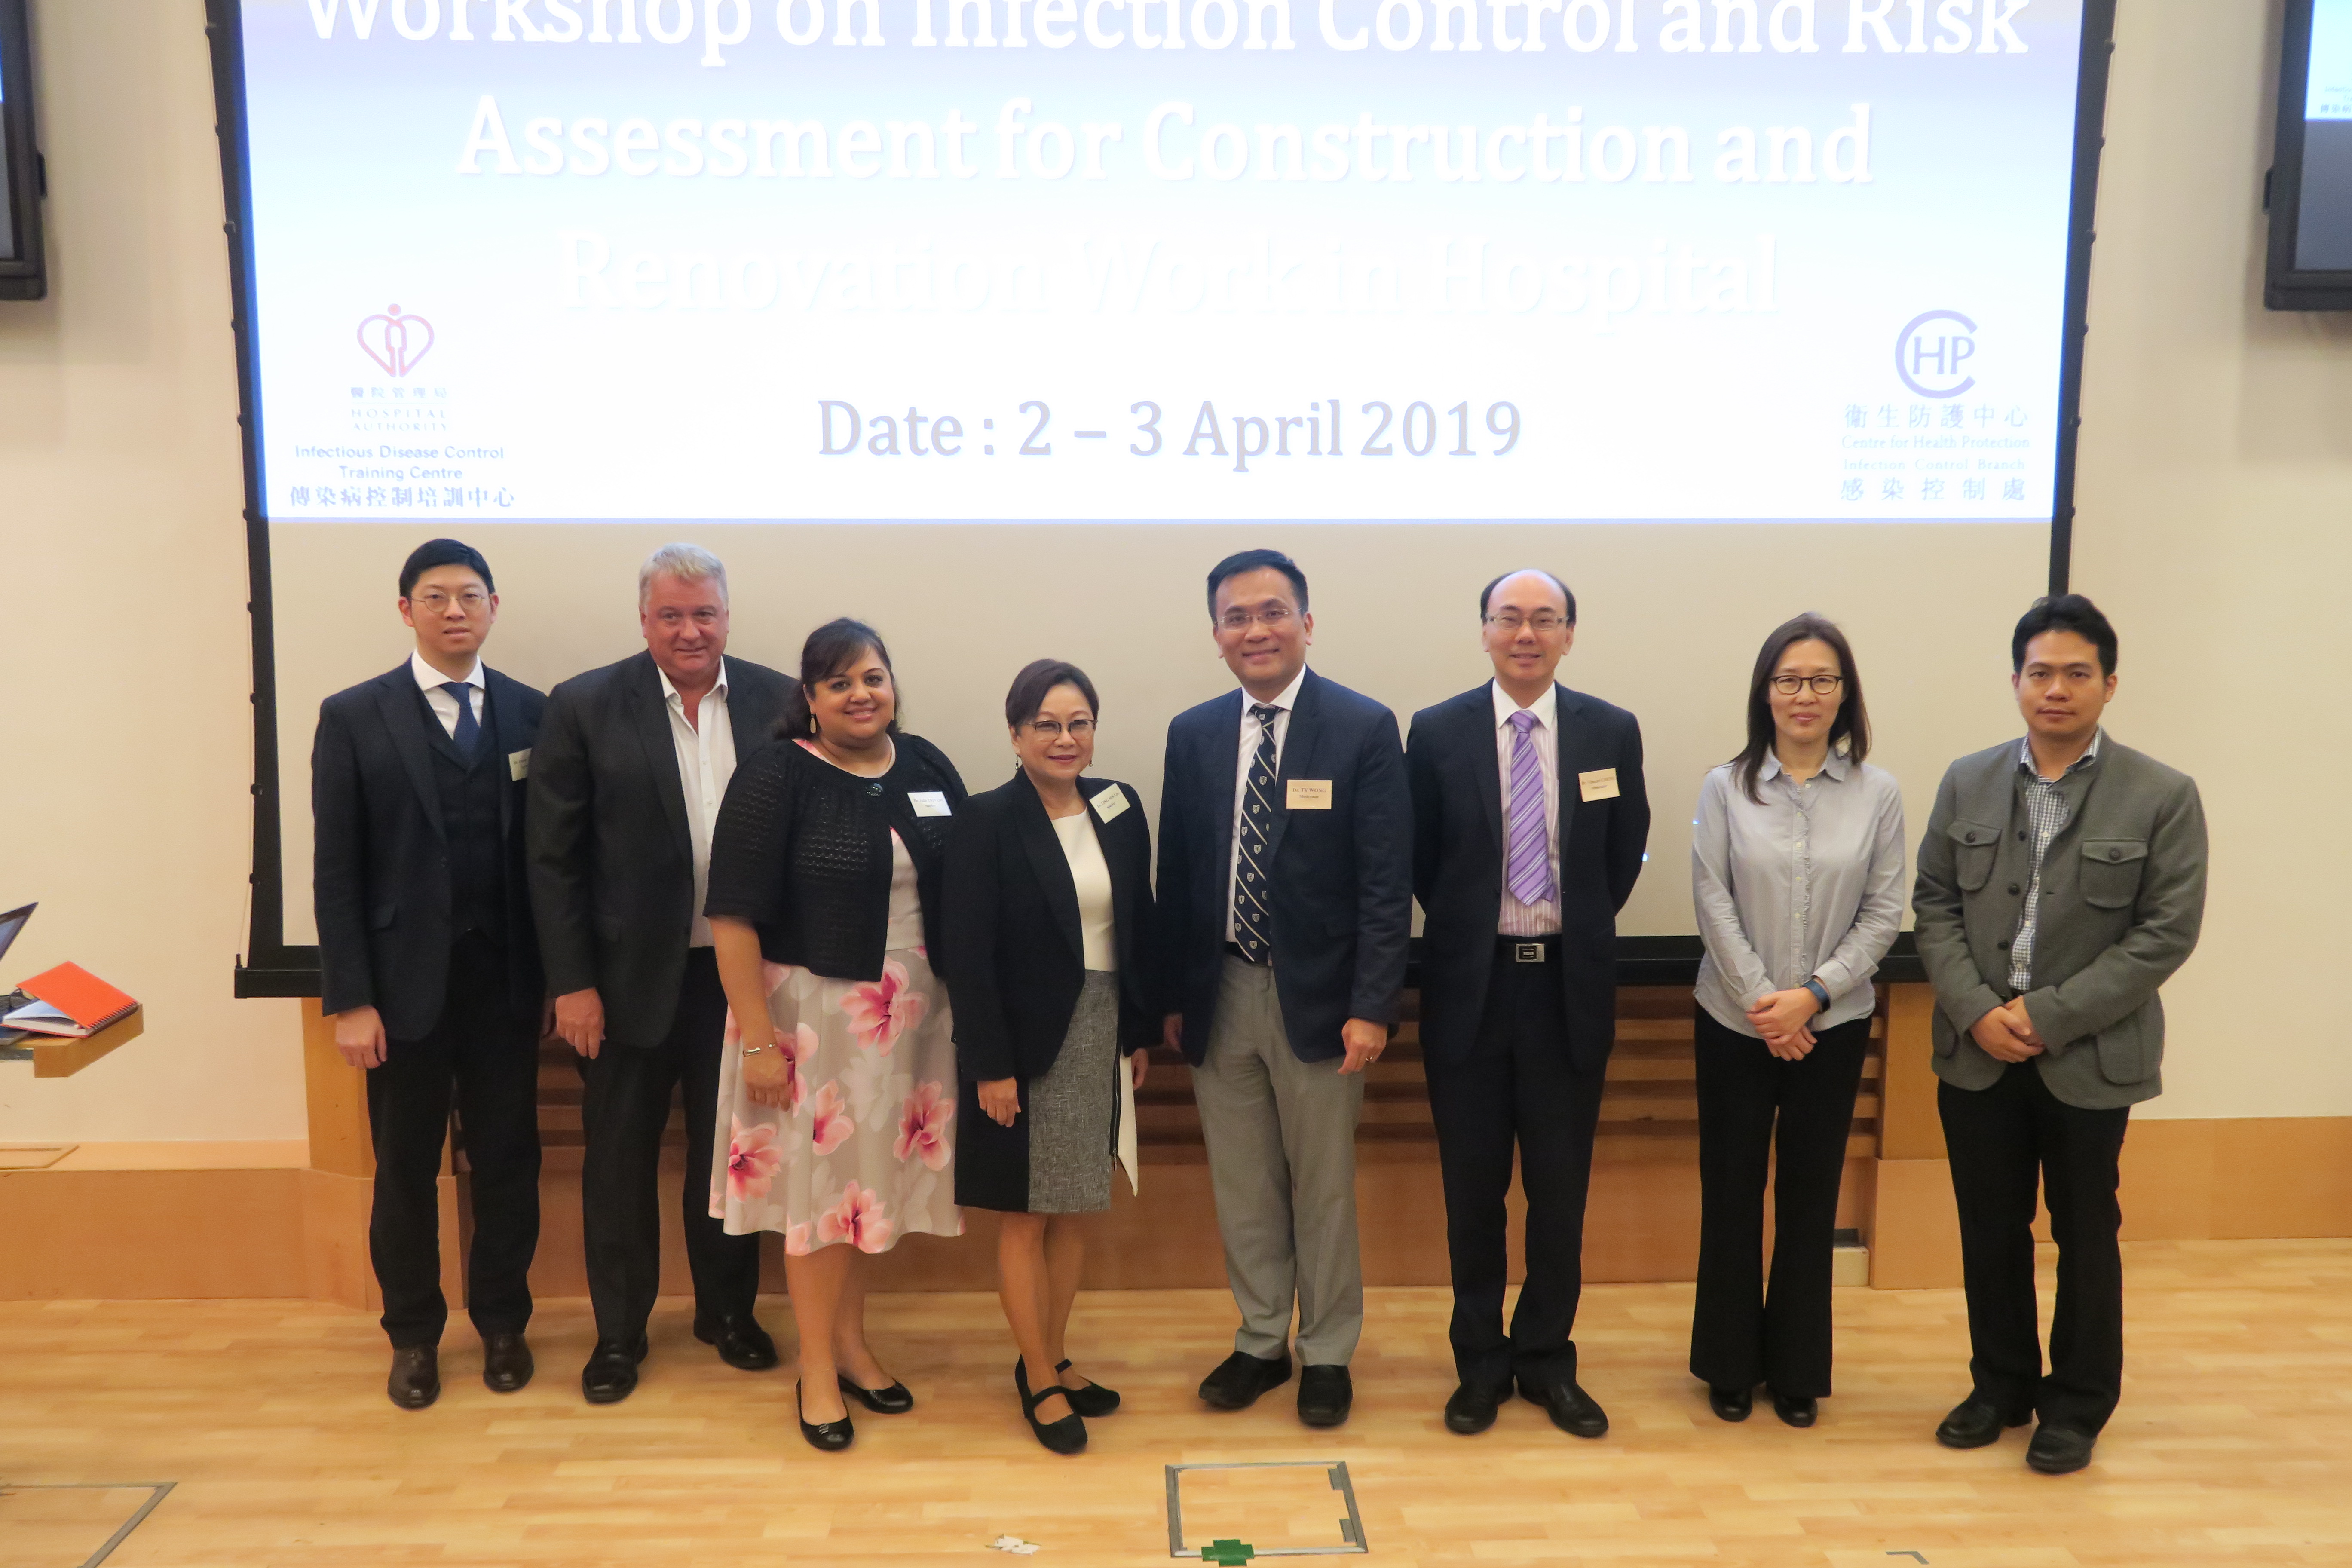 Workshop on Infection Control and Risk Assessment for Construction and Renovation Work in Hospital - 2-3 April 2019 Thumbnail